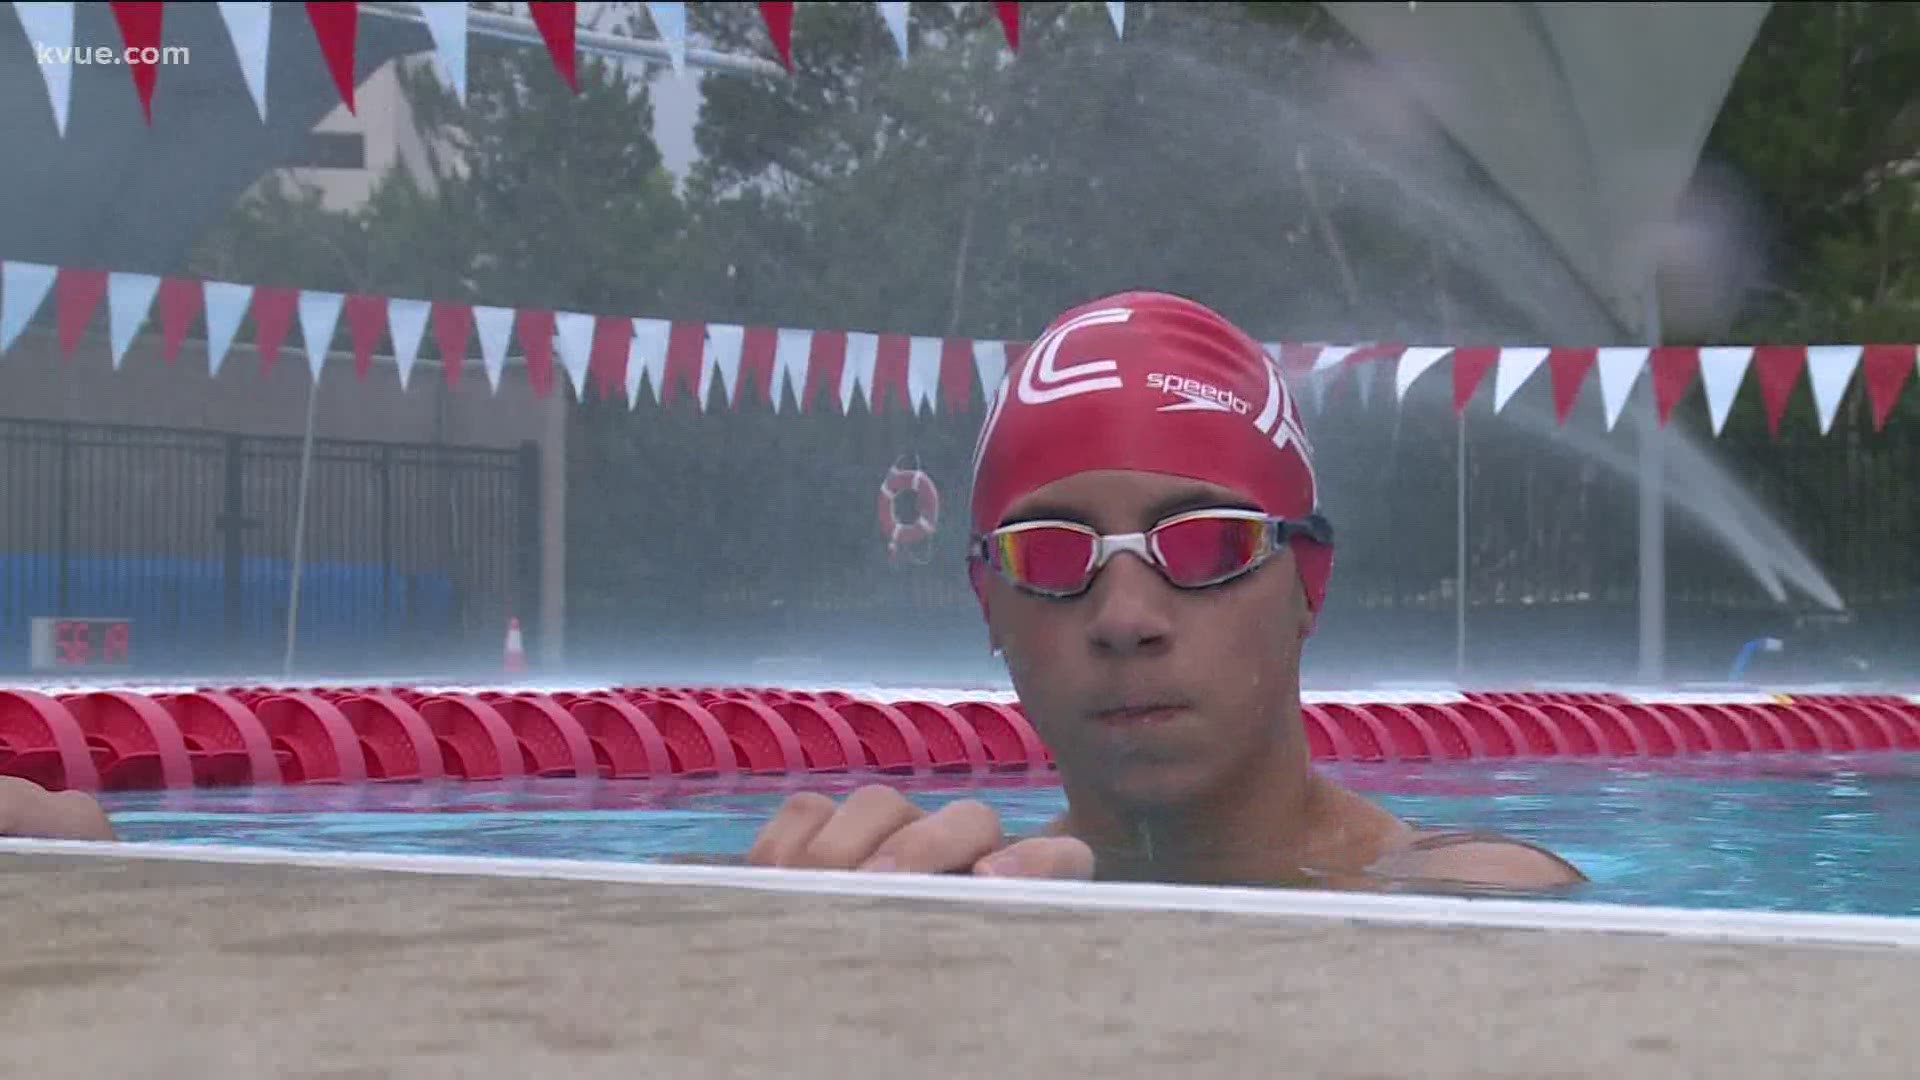 Jordin Gwyn was born with Disorders of the Corpus Callosum. He uses swimming to overcome his disability.